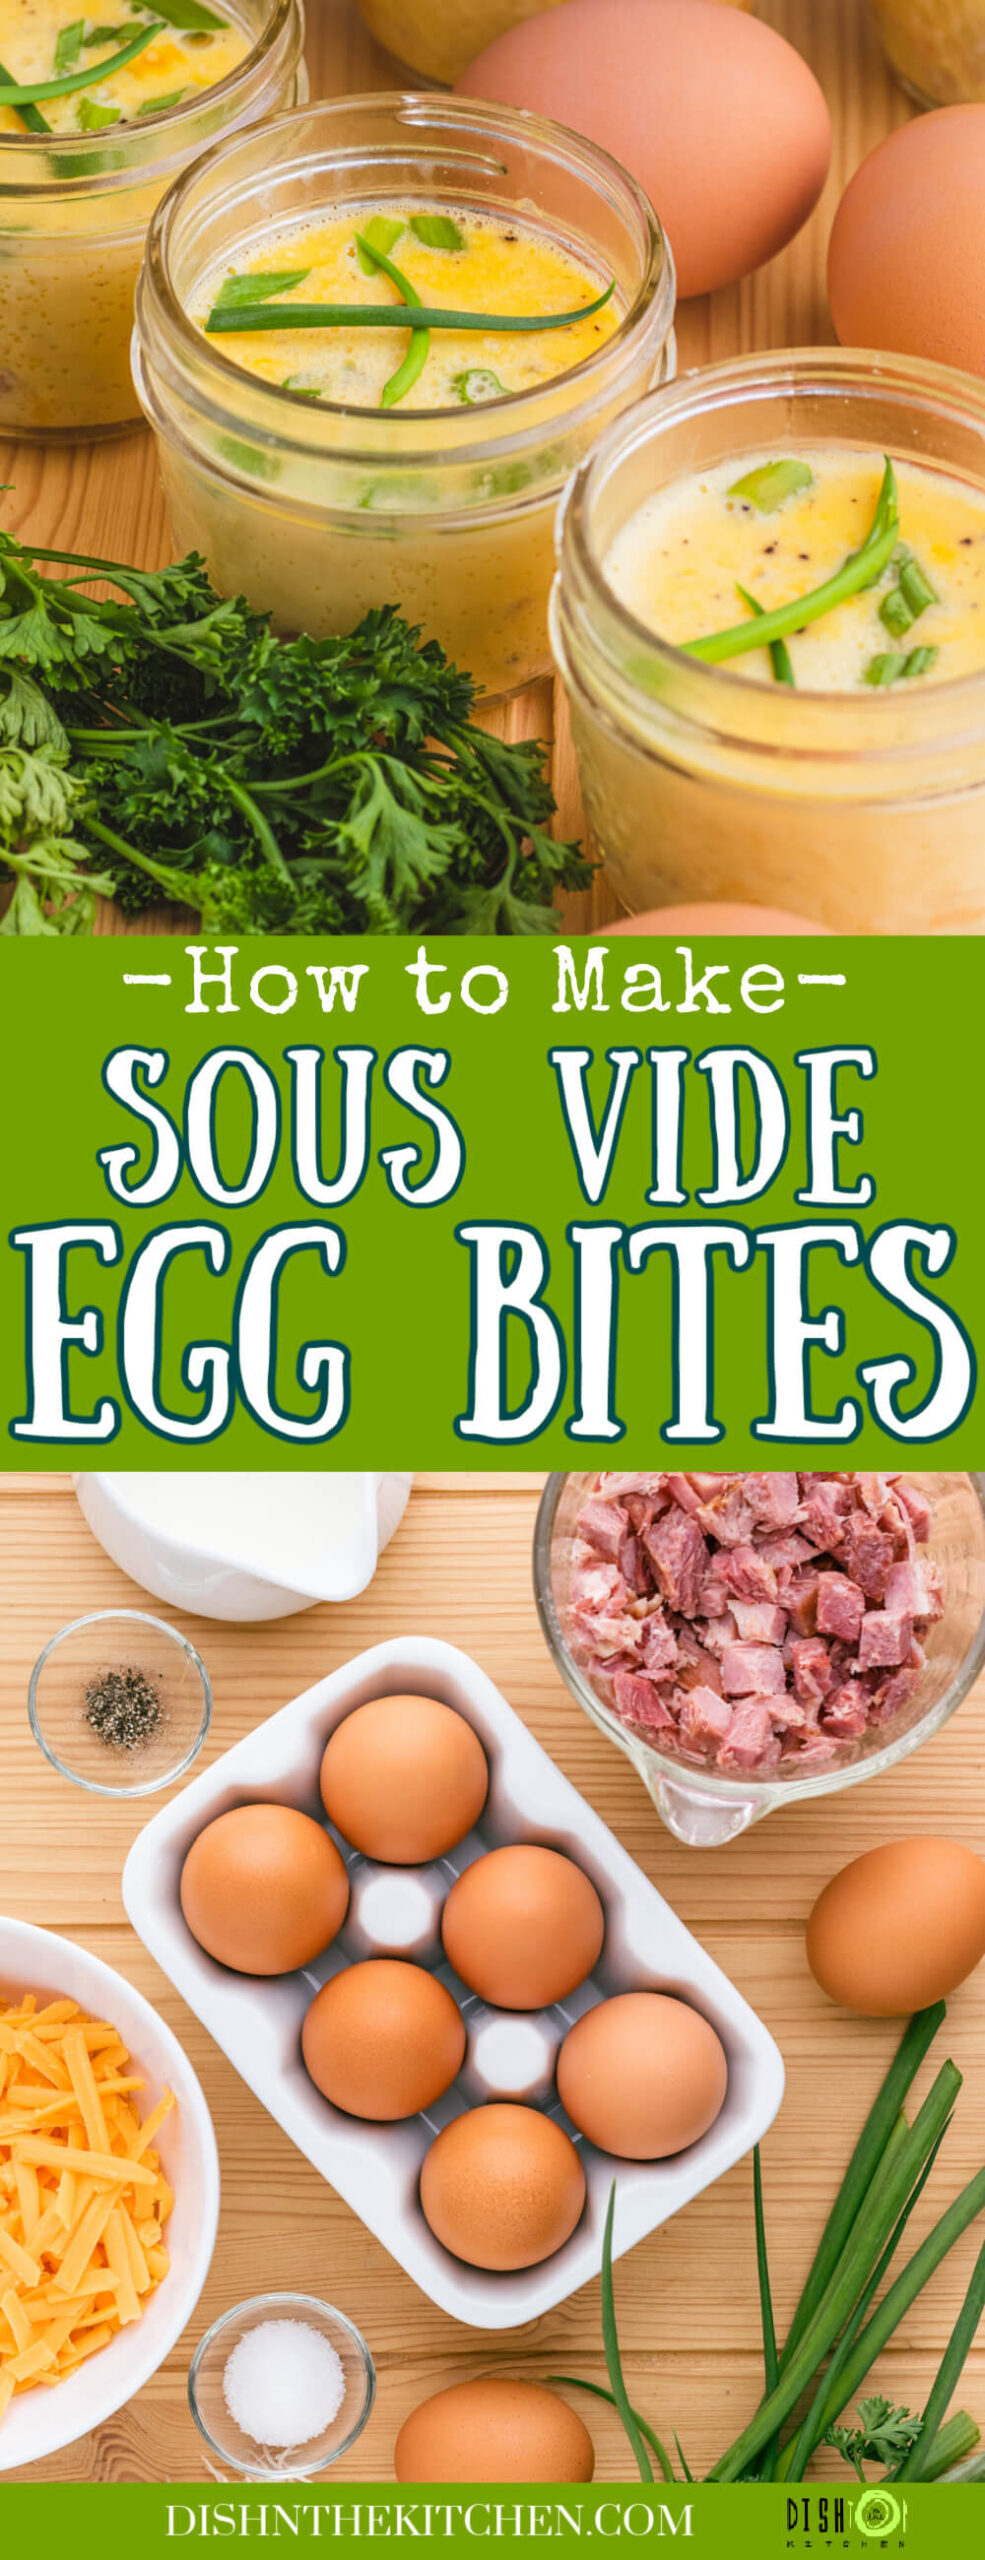 Pinterest image featuring sous vide egg bites in glass jars and ingredients used to make them.